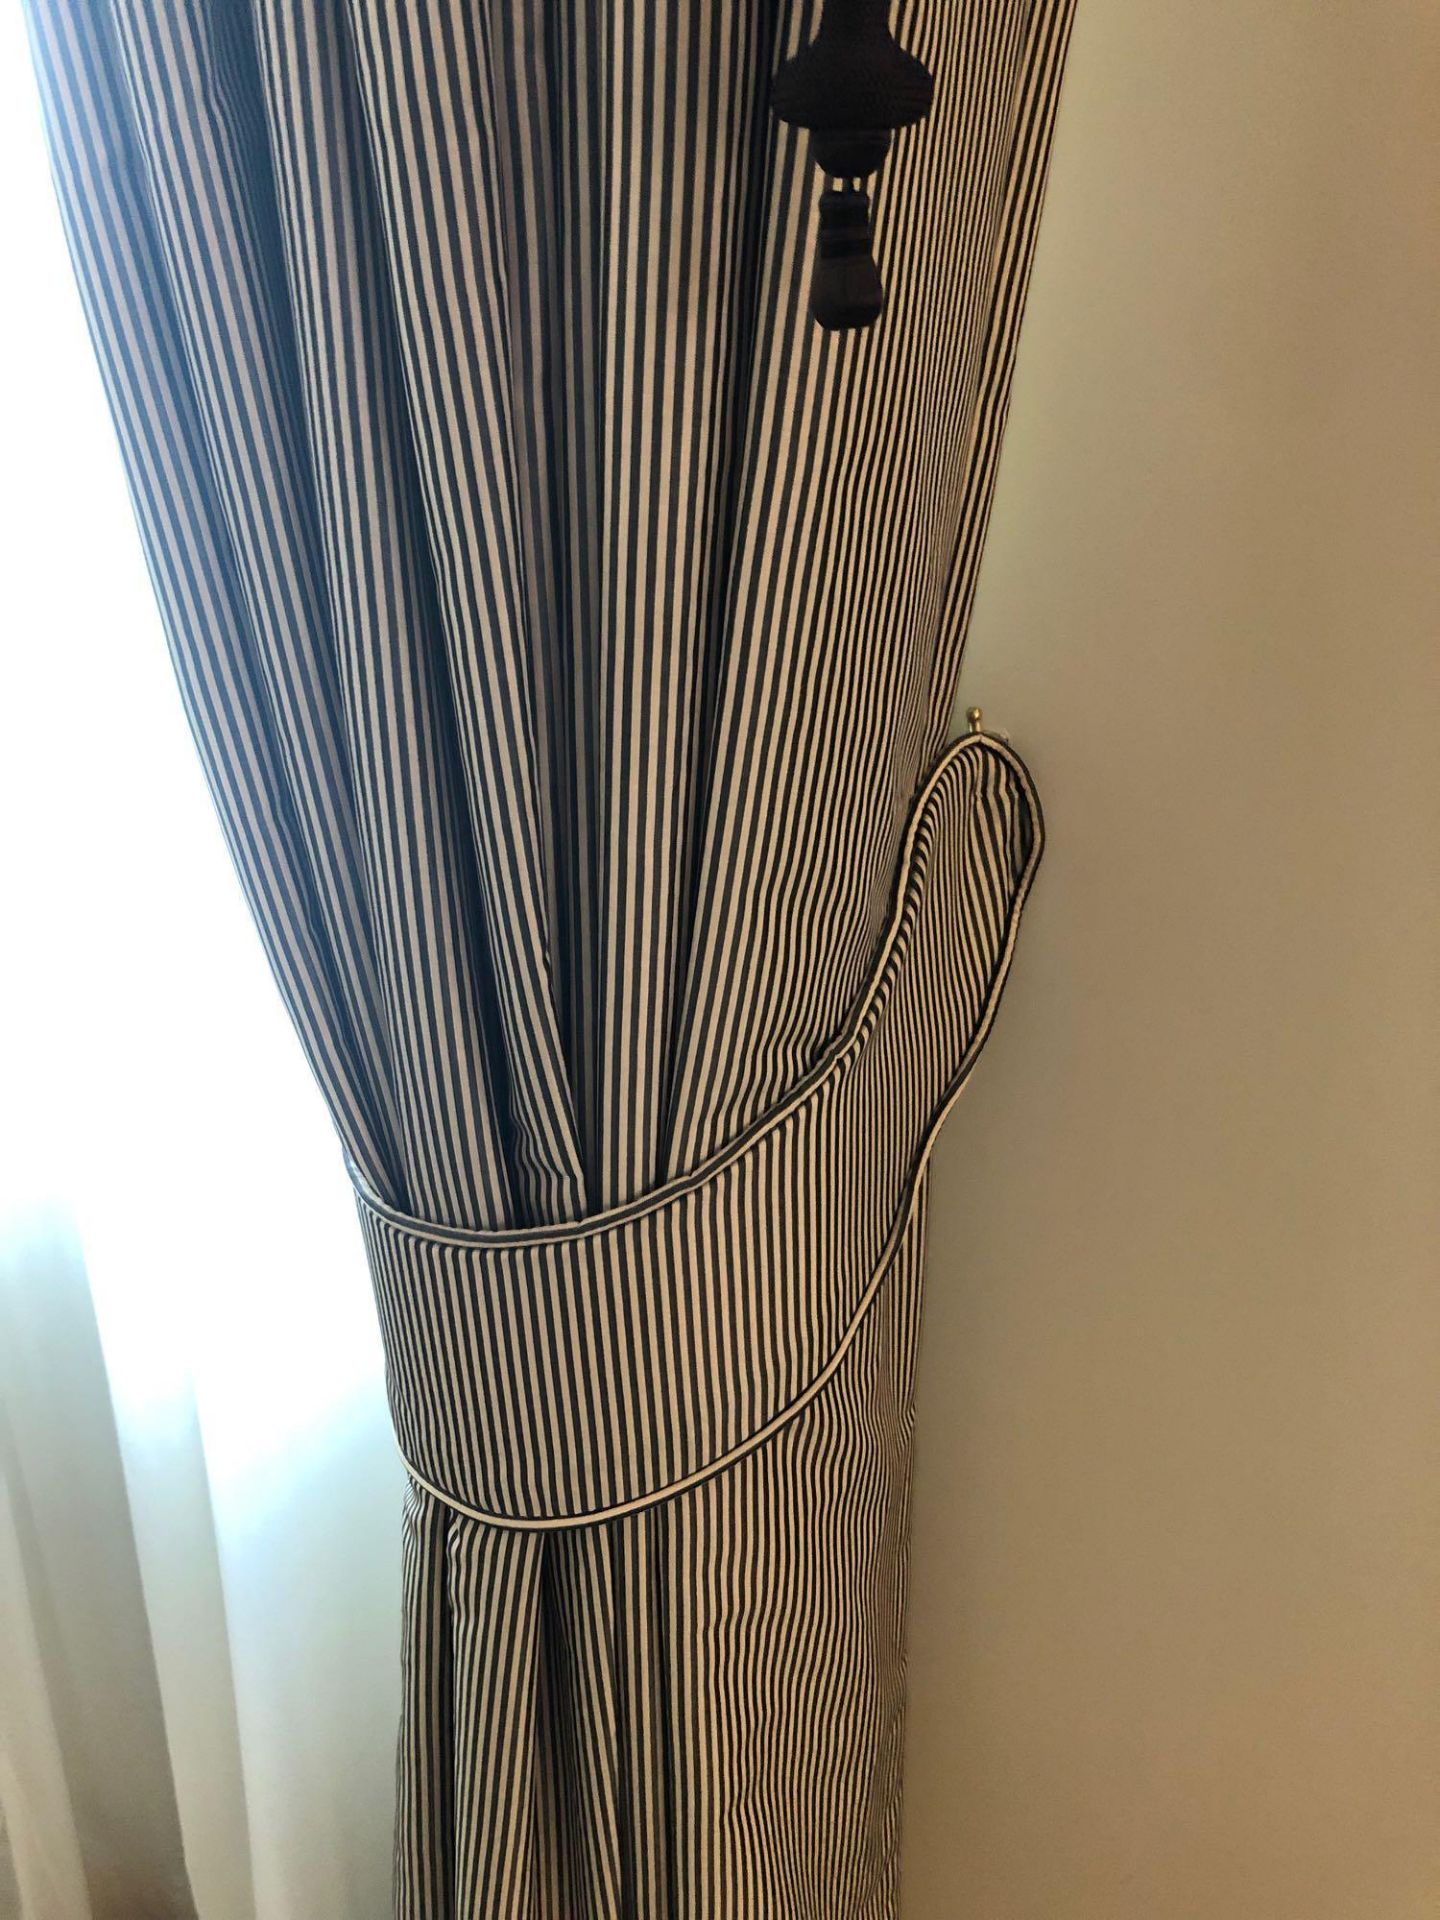 A Pair Of Drapes Fabric In Brown And White Striped Complete With Pelmet And Tassels 257 x 180cm ( - Image 4 of 4